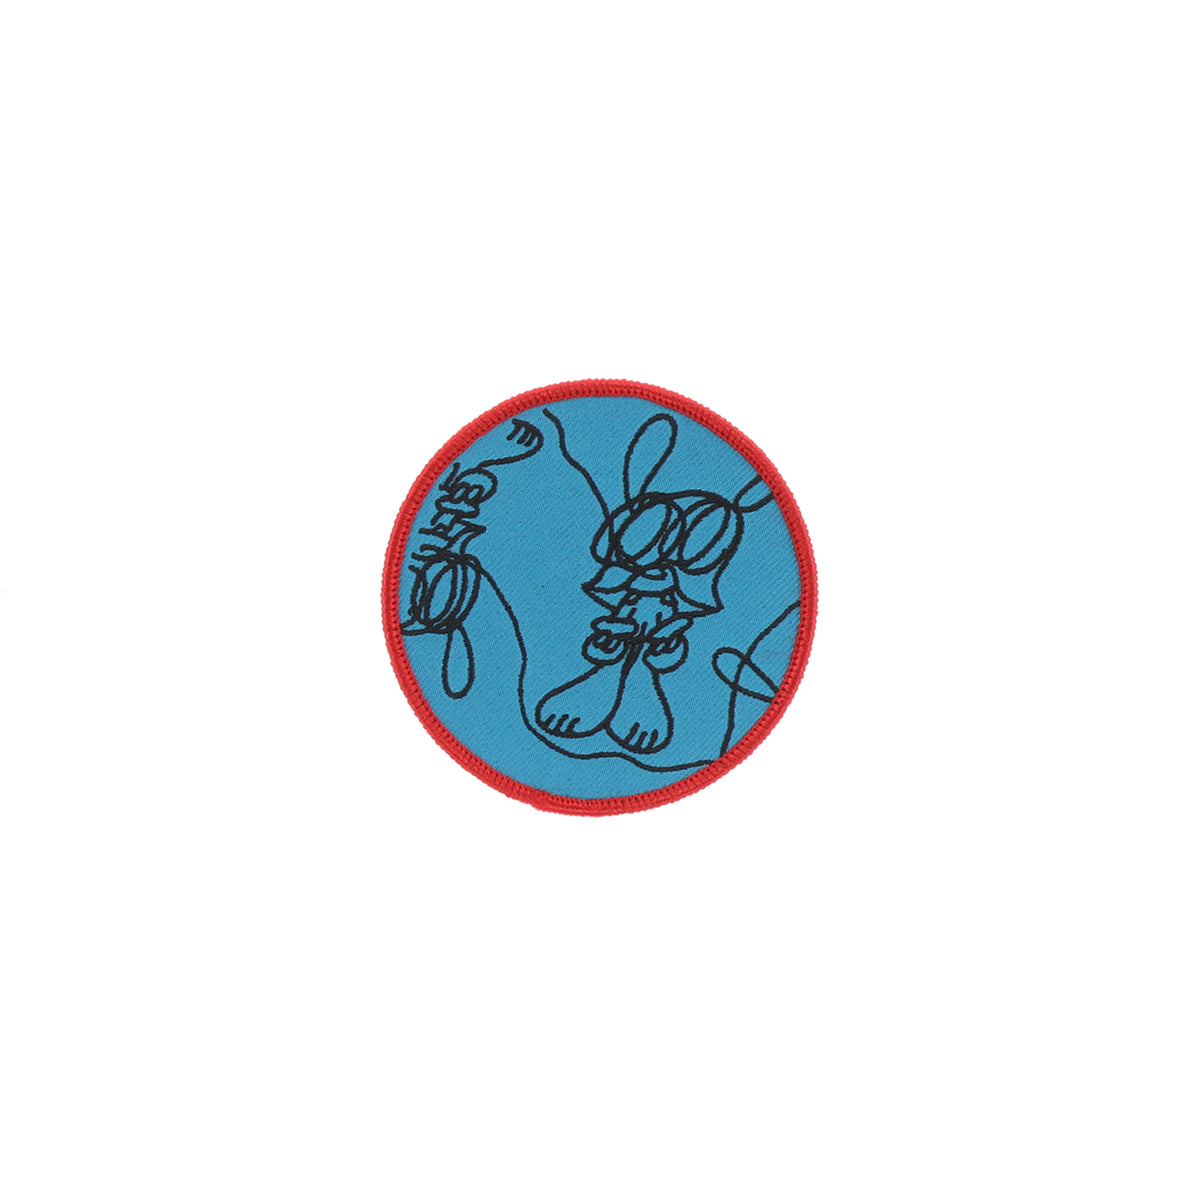 DRAWING PATCH PIN BADGE / BLUE